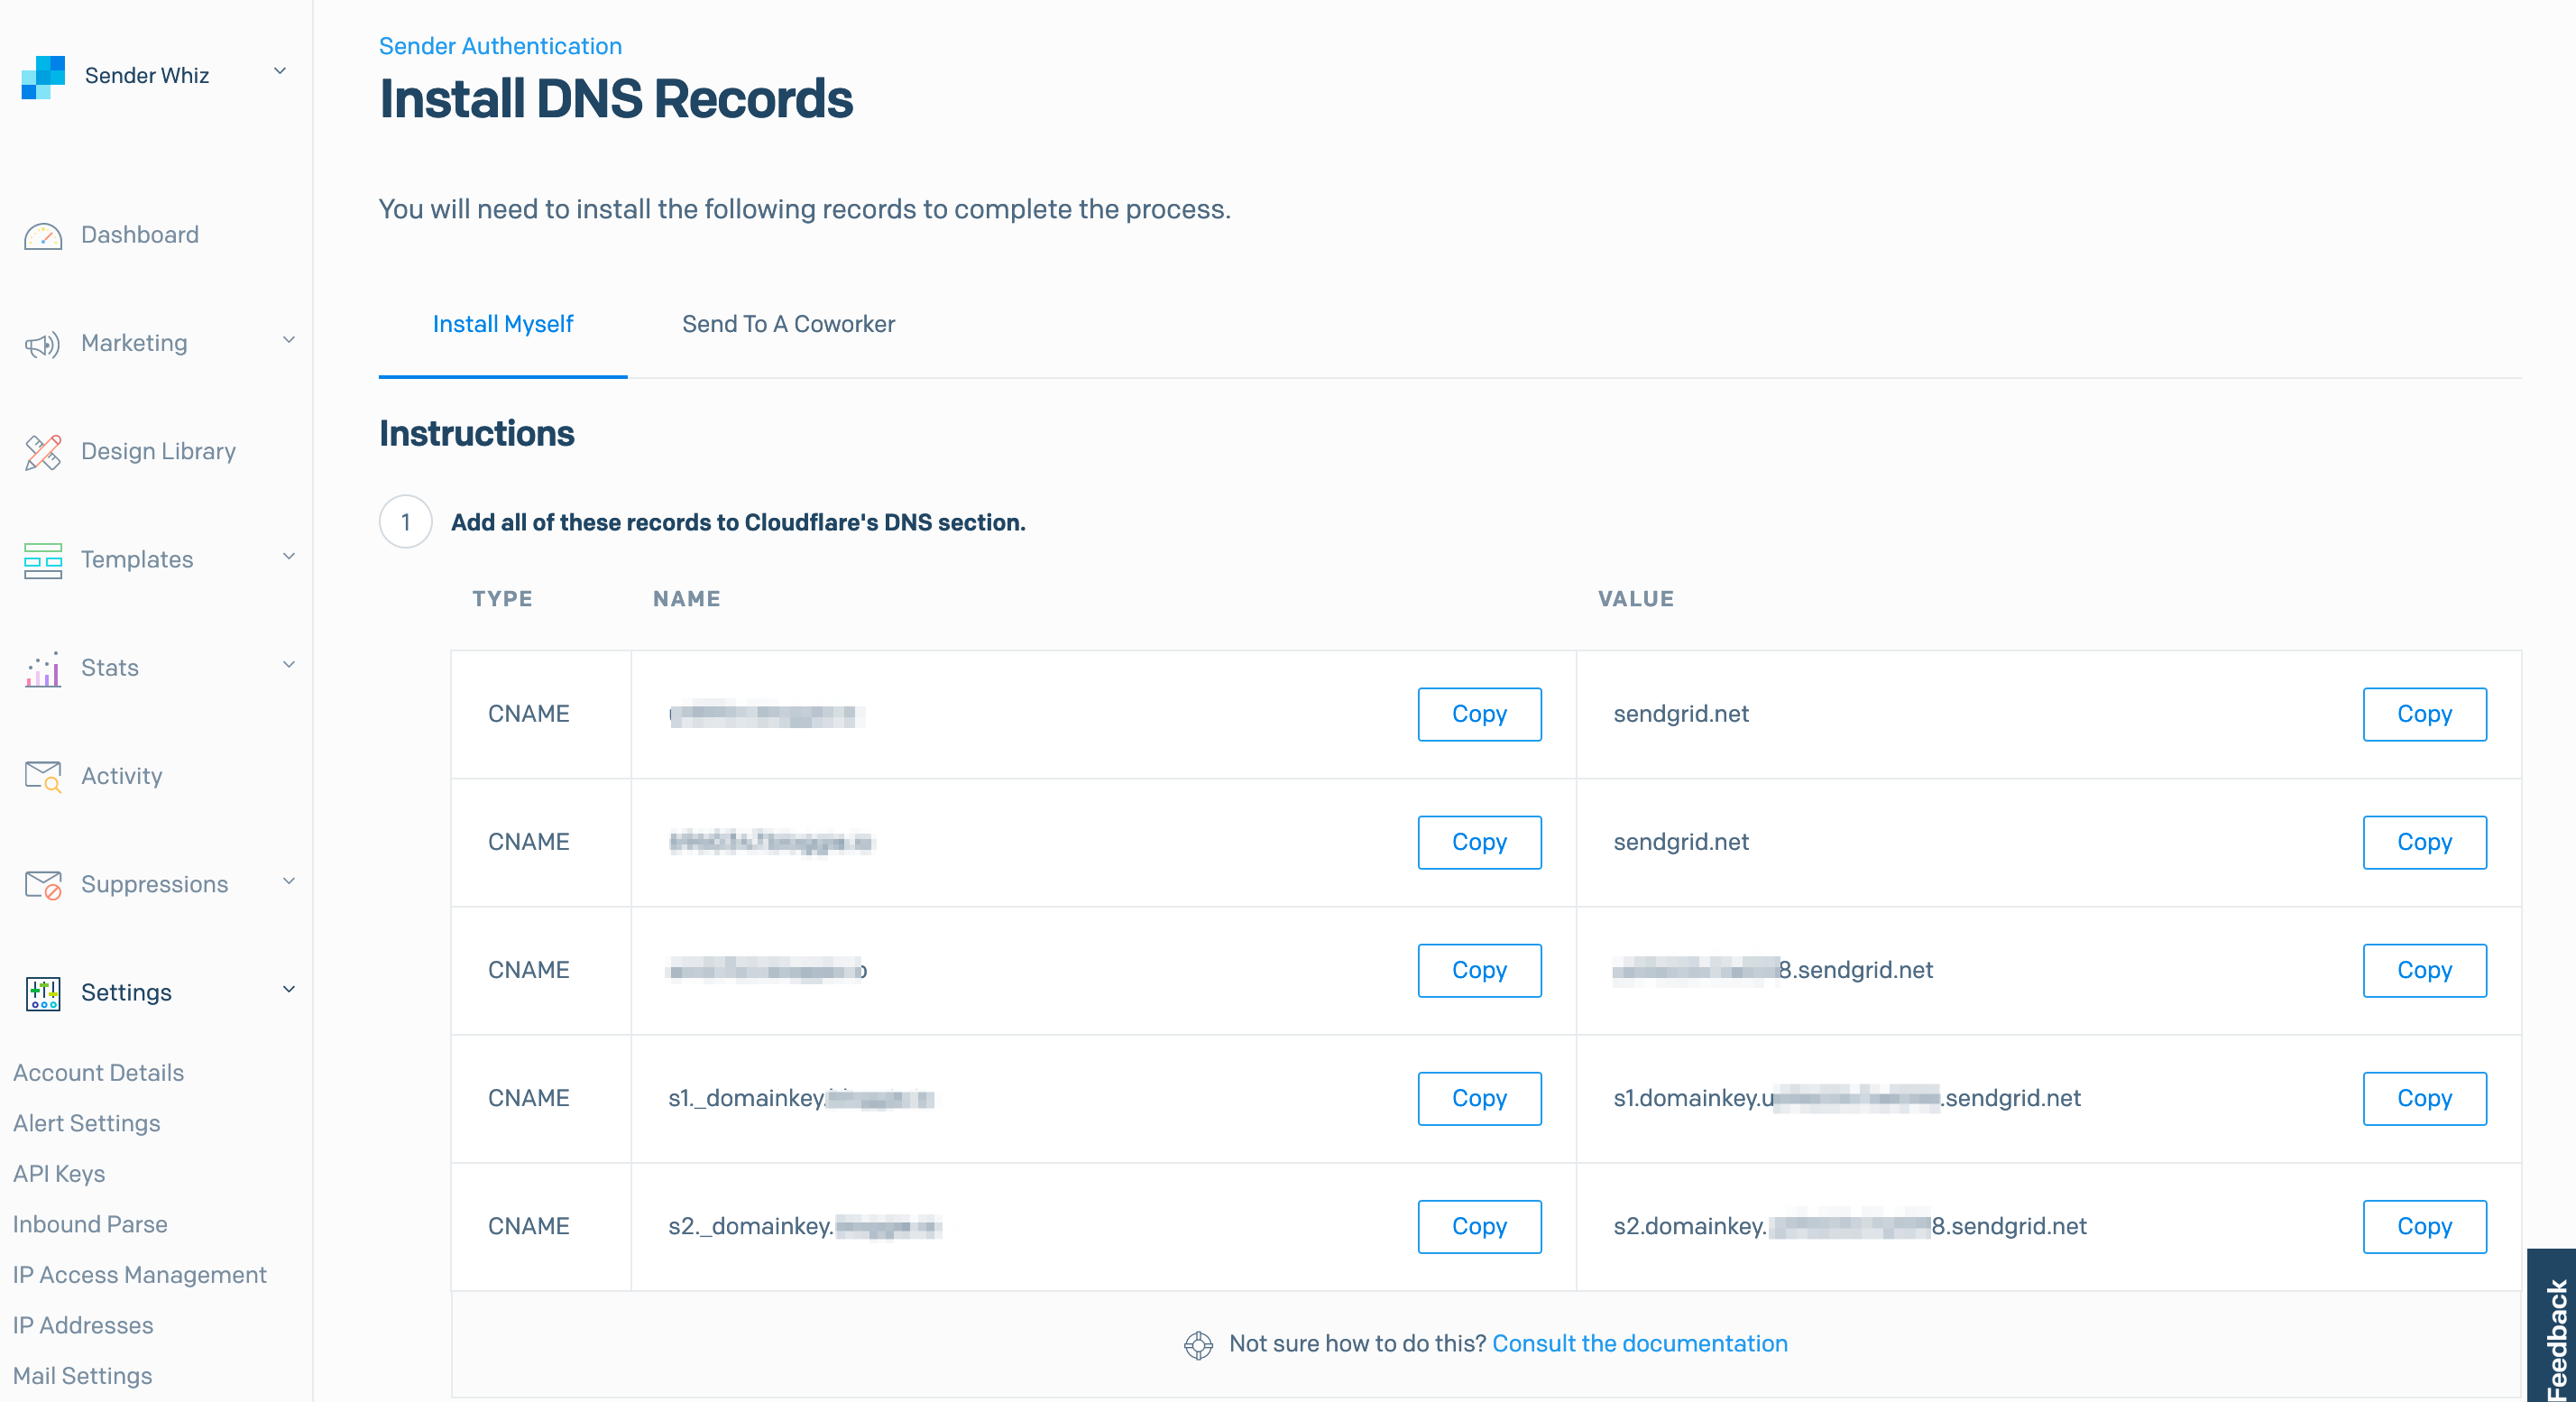 SendGrid DNS records for domain authentication (and link brand)